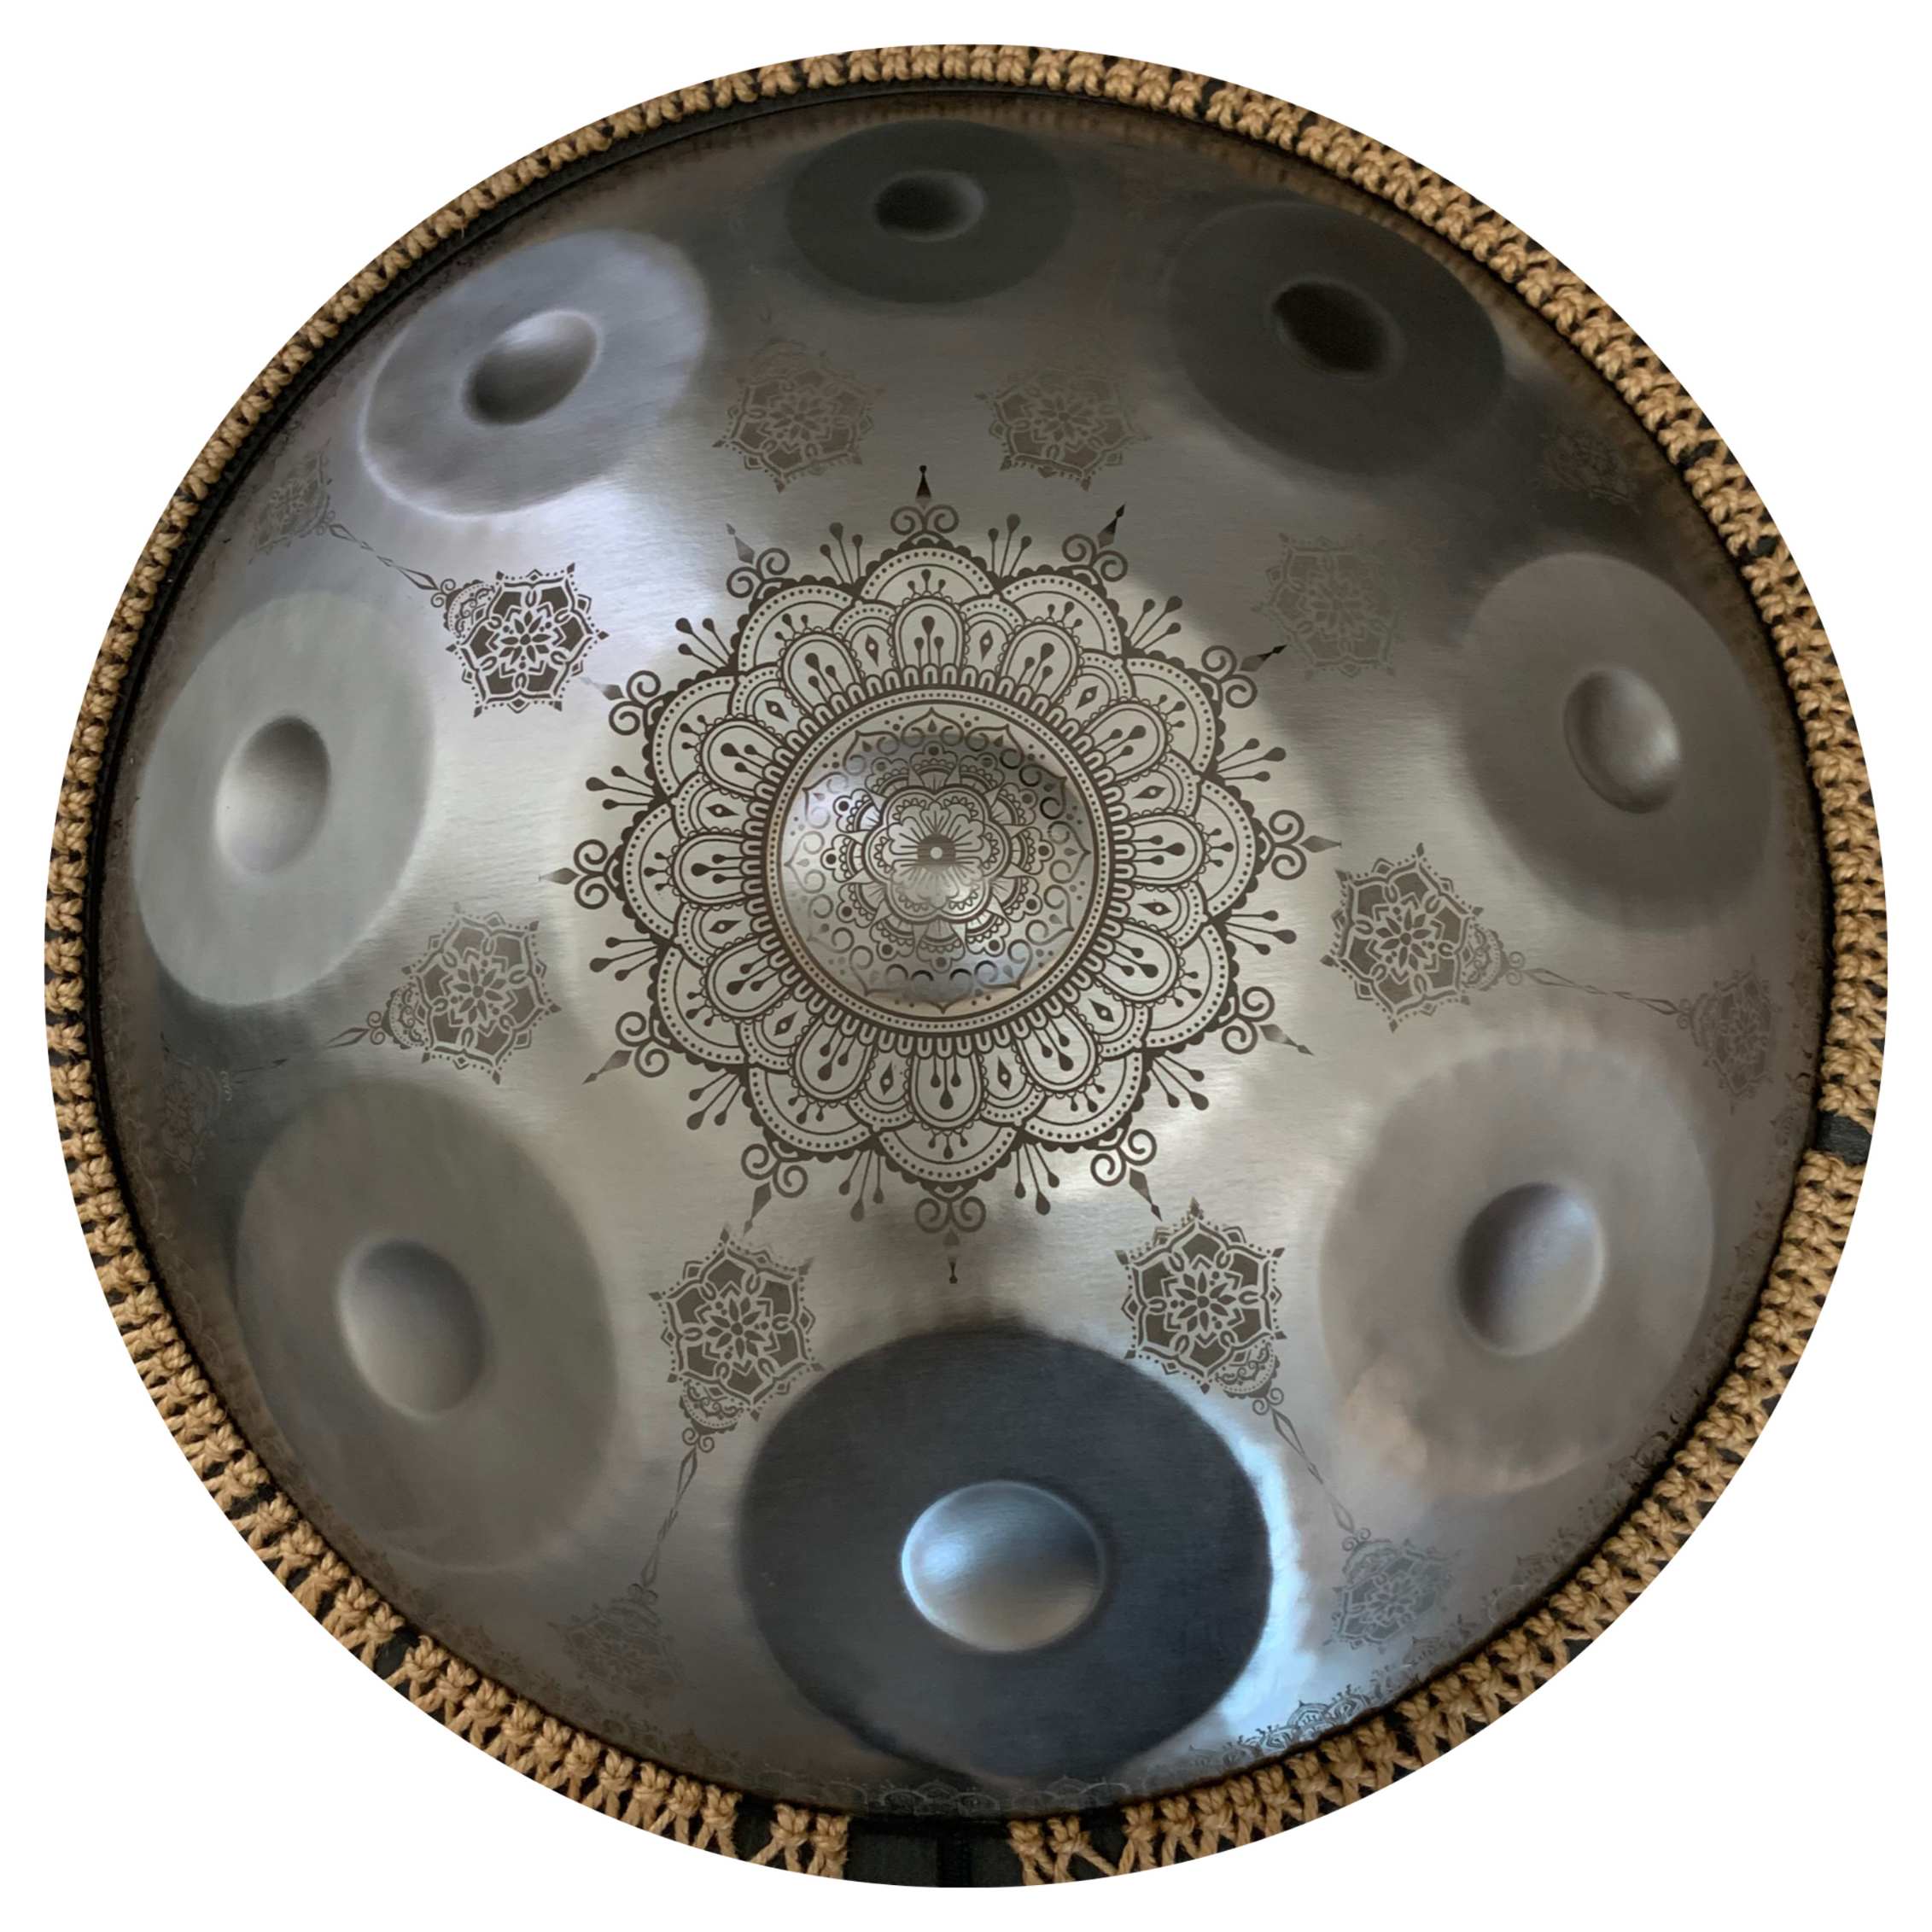 Silver handpan with delicate floral etchings and shimmering tones